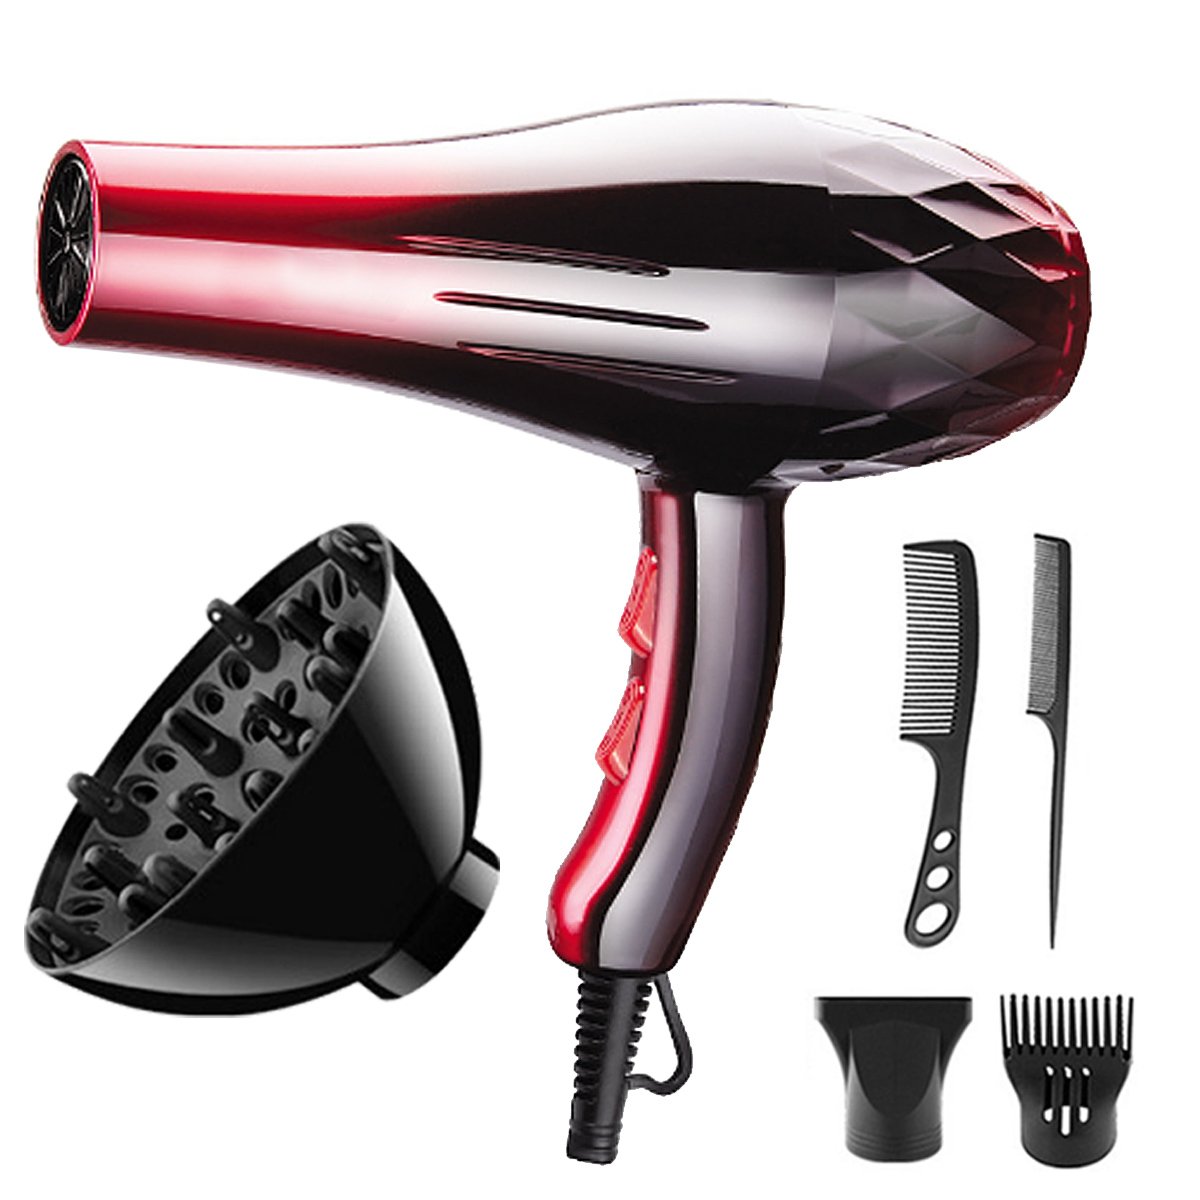 

220V 2200W Electric Hair Dryer Heat Blower Beauty Constant-Temp Hair Protection